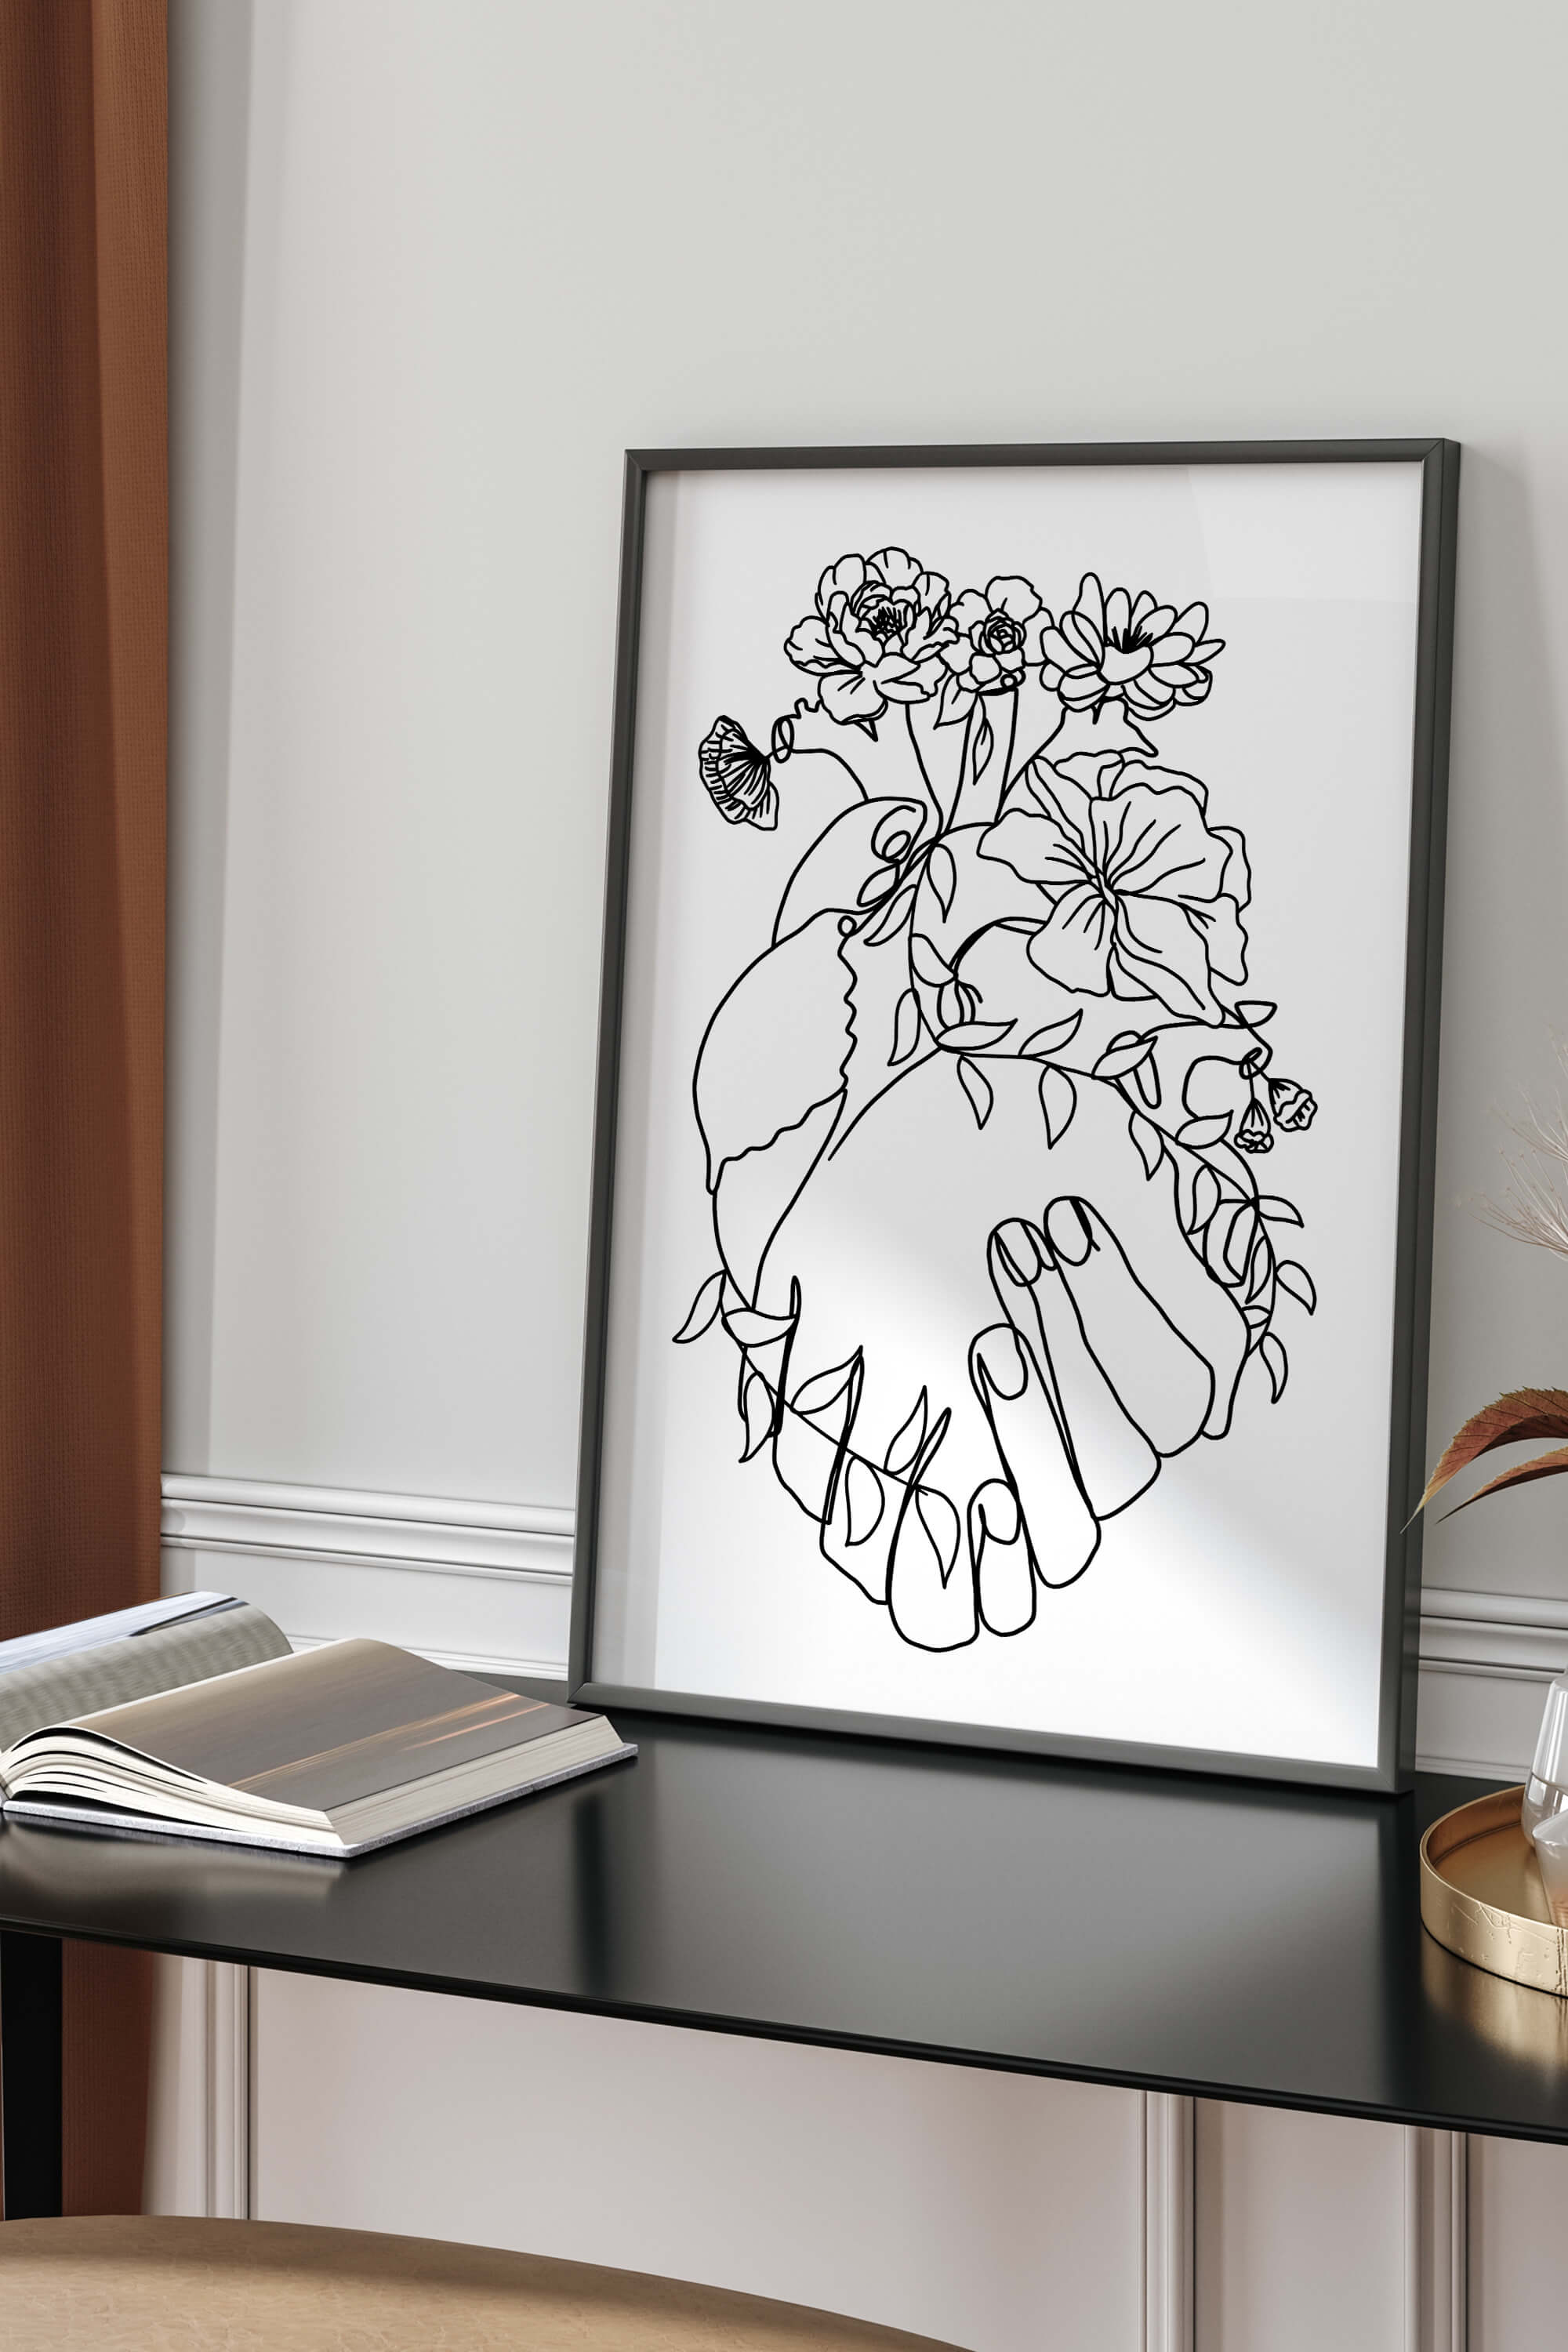 A photo of a framed love line art print that shows the human heart anatomy with aesthetic flower lines. The print is in black and white and combines organic and geometric shapes.